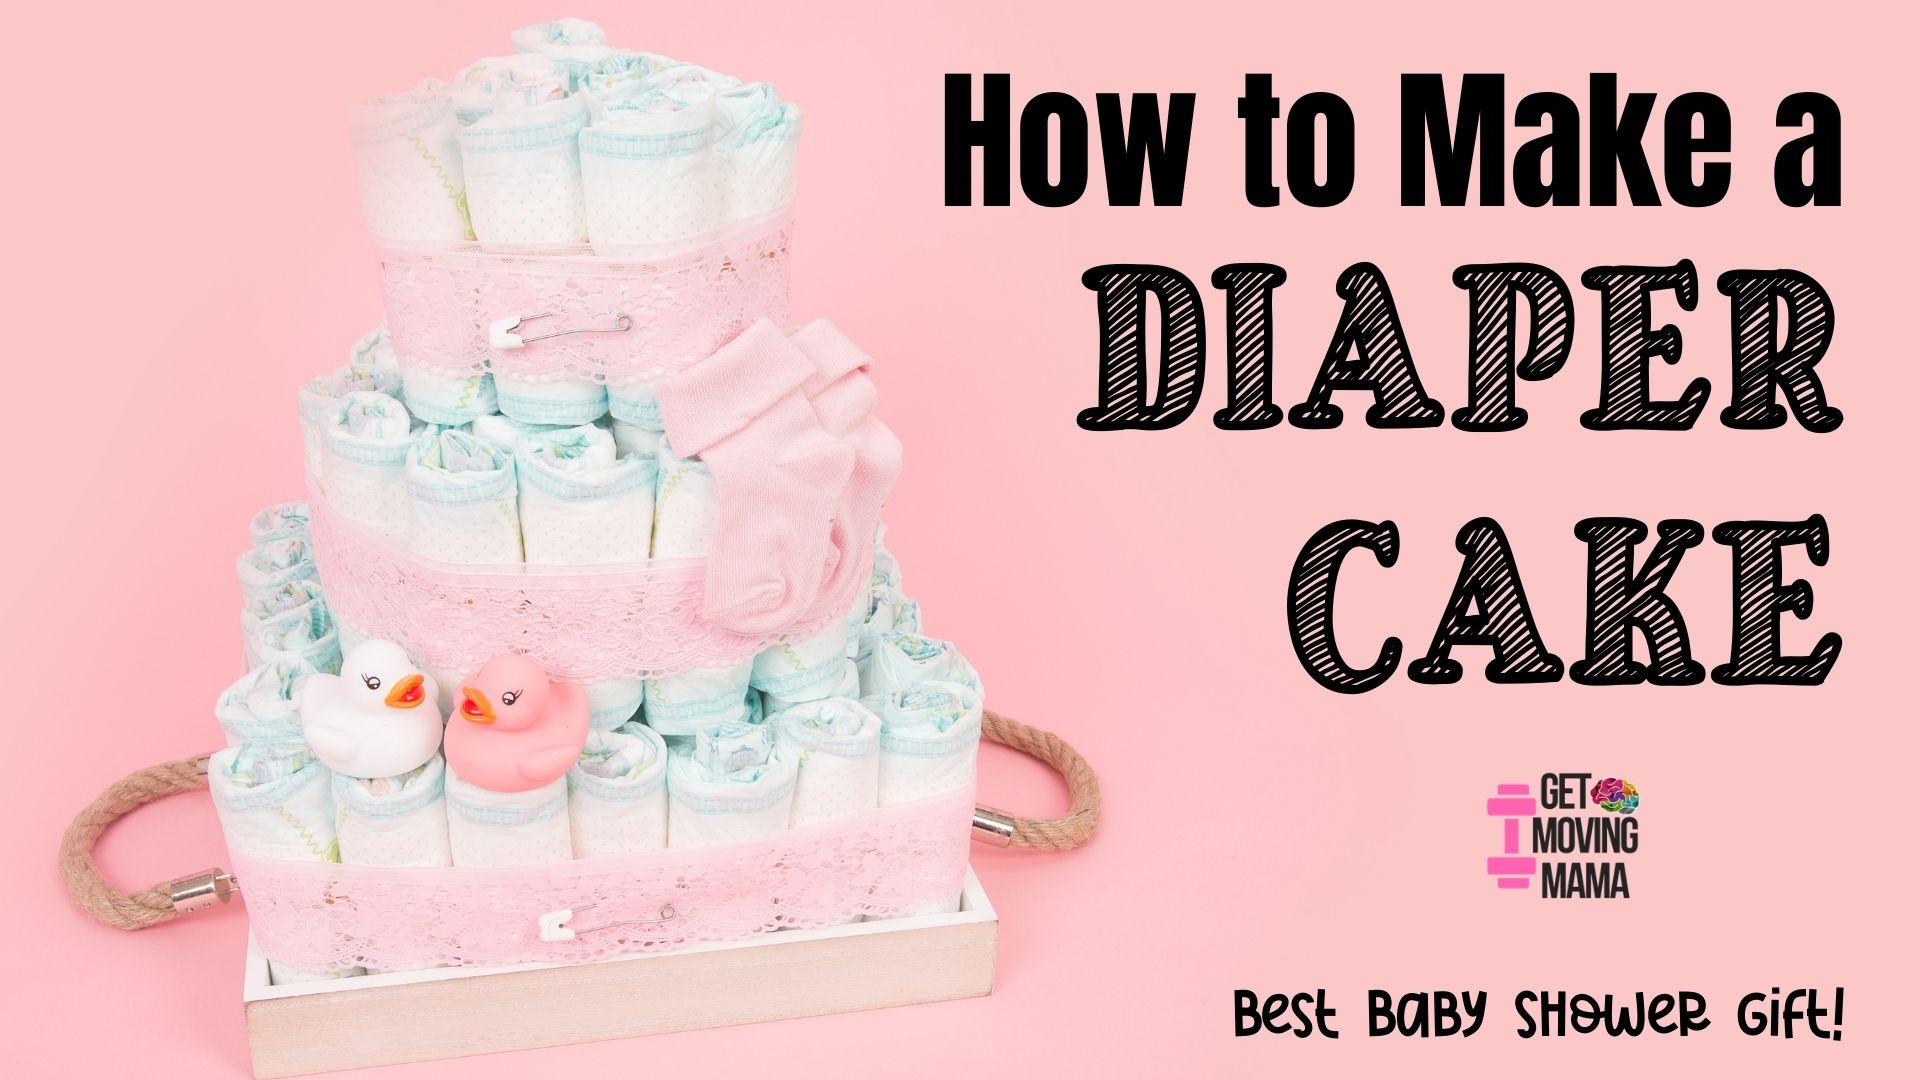 How to Make a Diaper Cake for a Baby Shower Gift